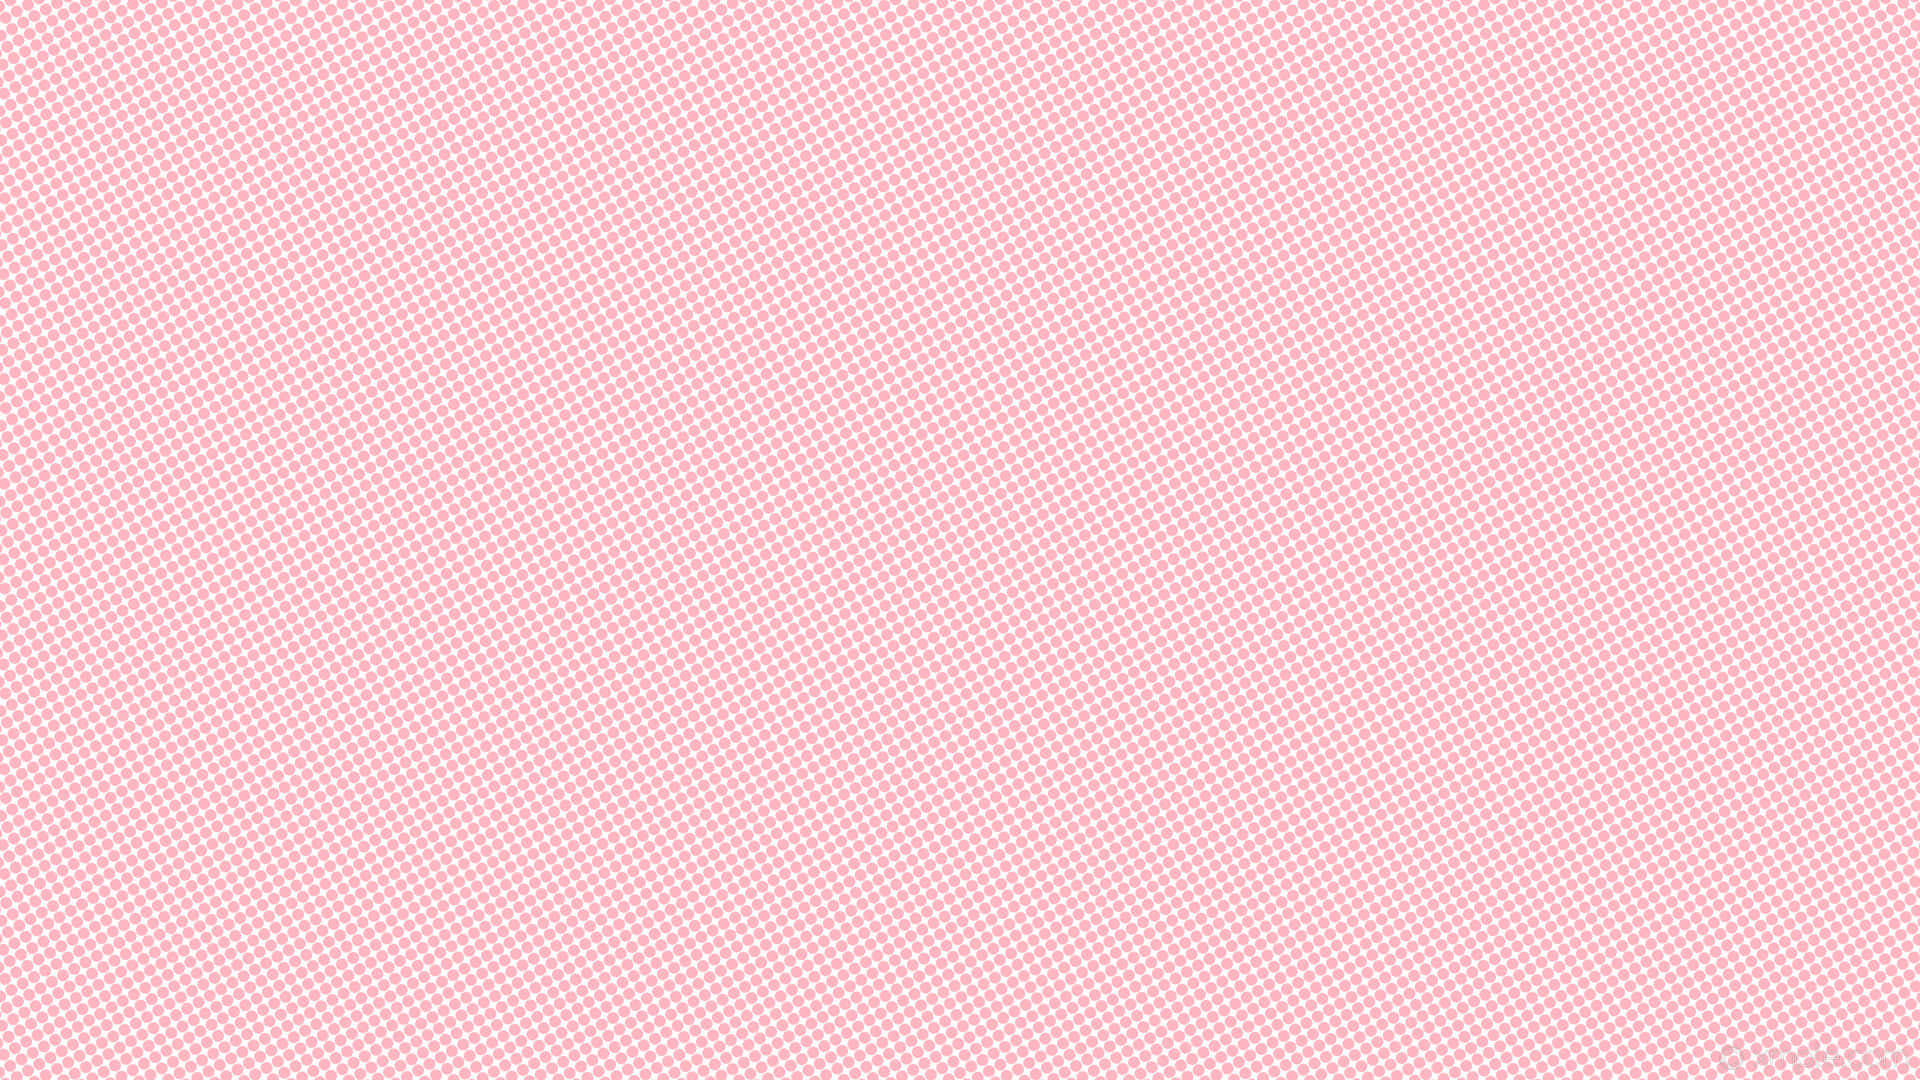 Enjoy the soft and vibrant color of this solid pink background. Wallpaper